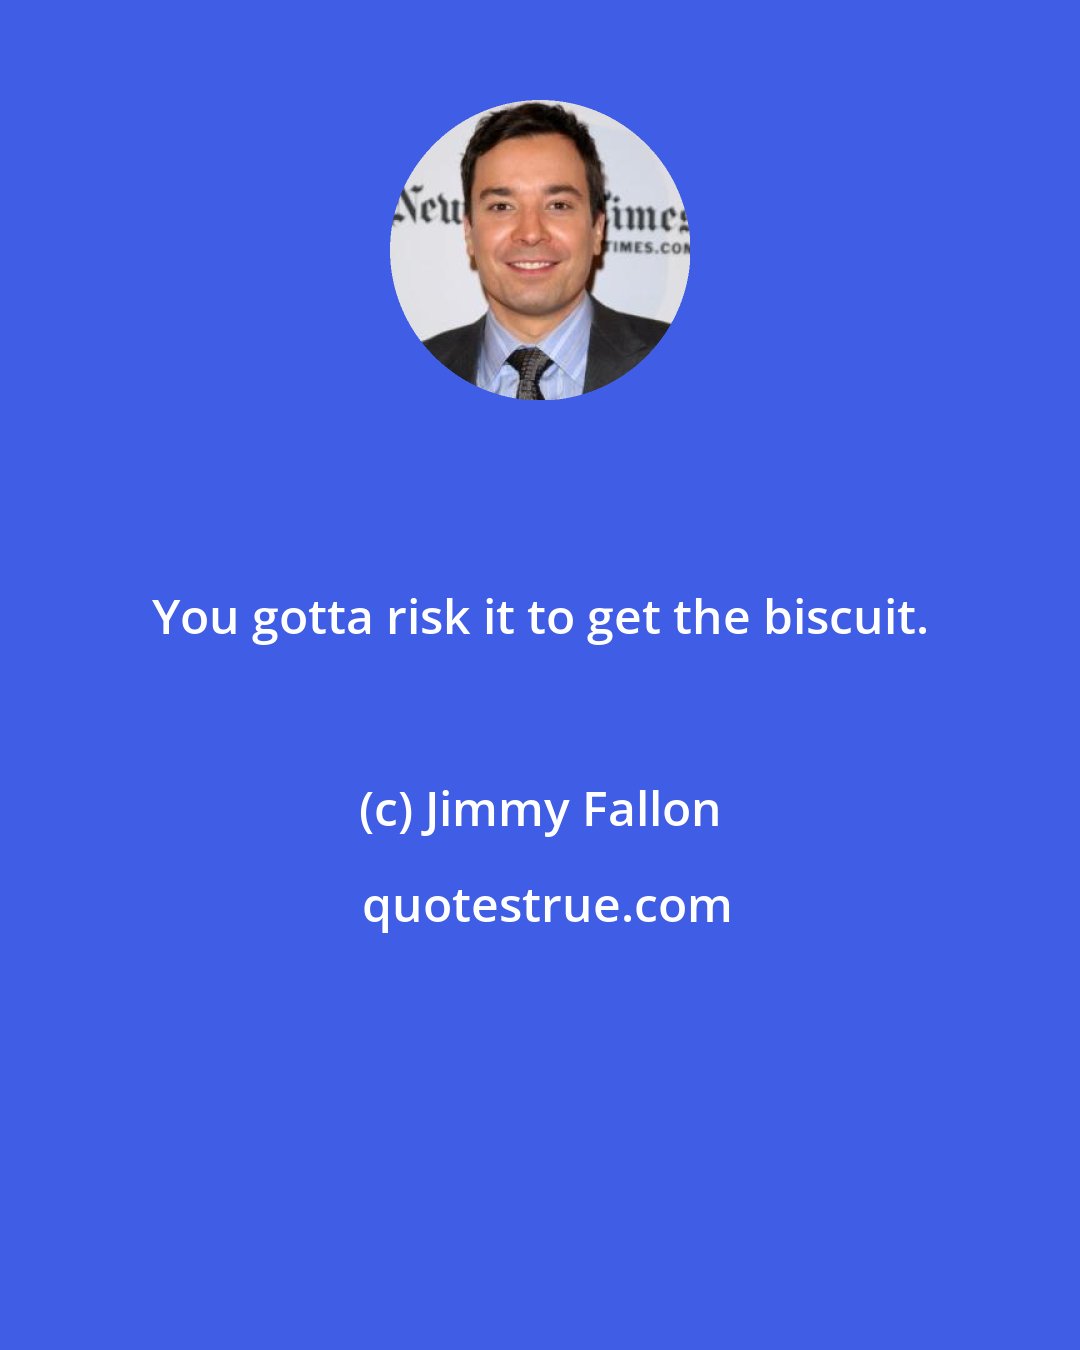 Jimmy Fallon: You gotta risk it to get the biscuit.